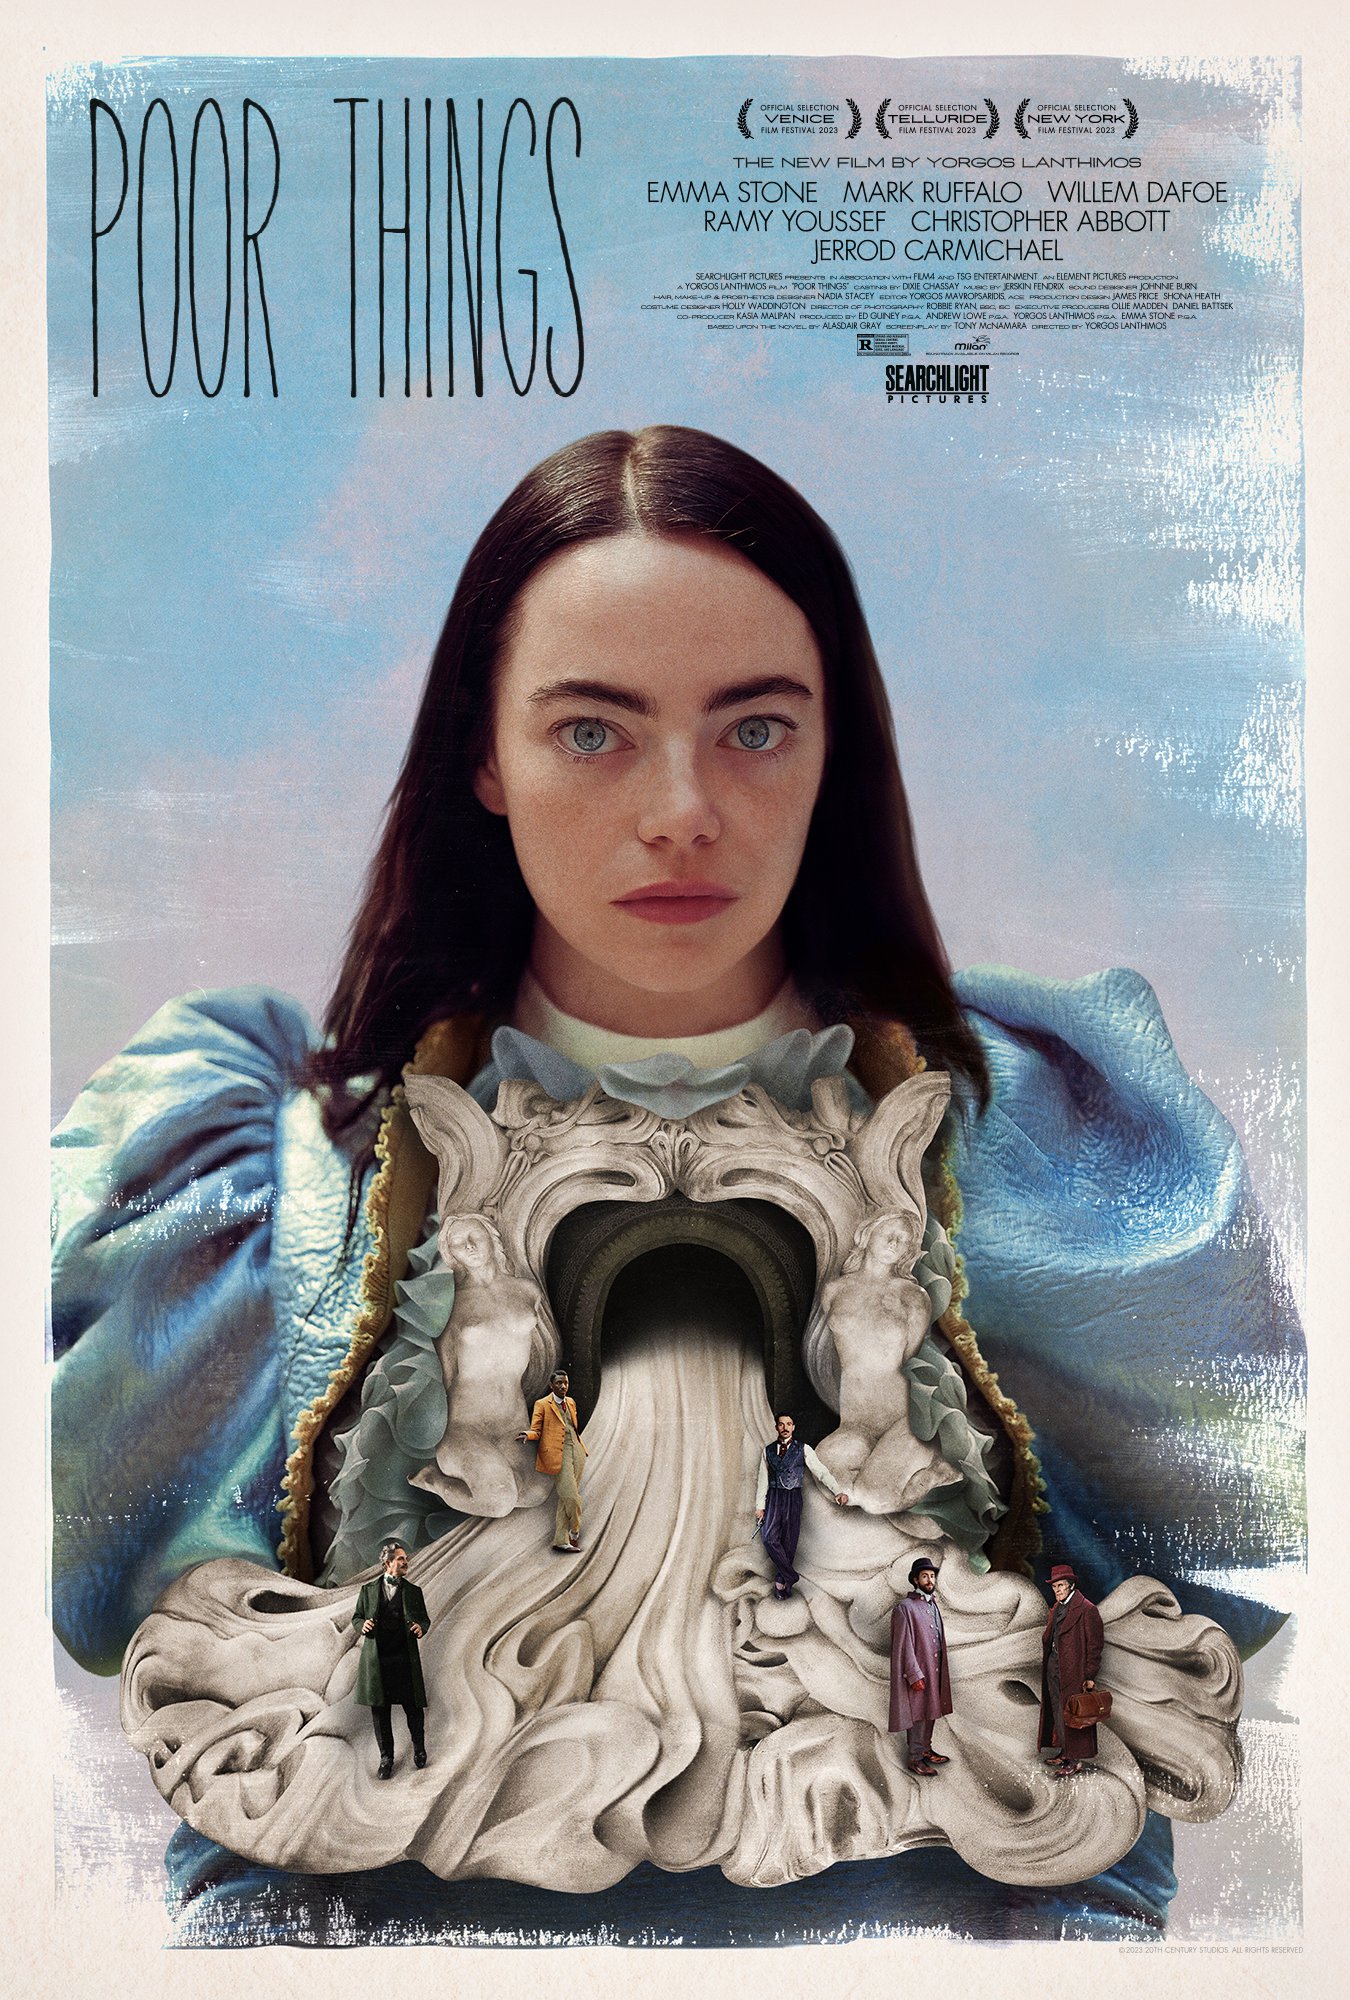 Phone wallpaper featuring promotional artwork for the film 'Poor Things' with a portrait-style image of the actress in a decorative frame.